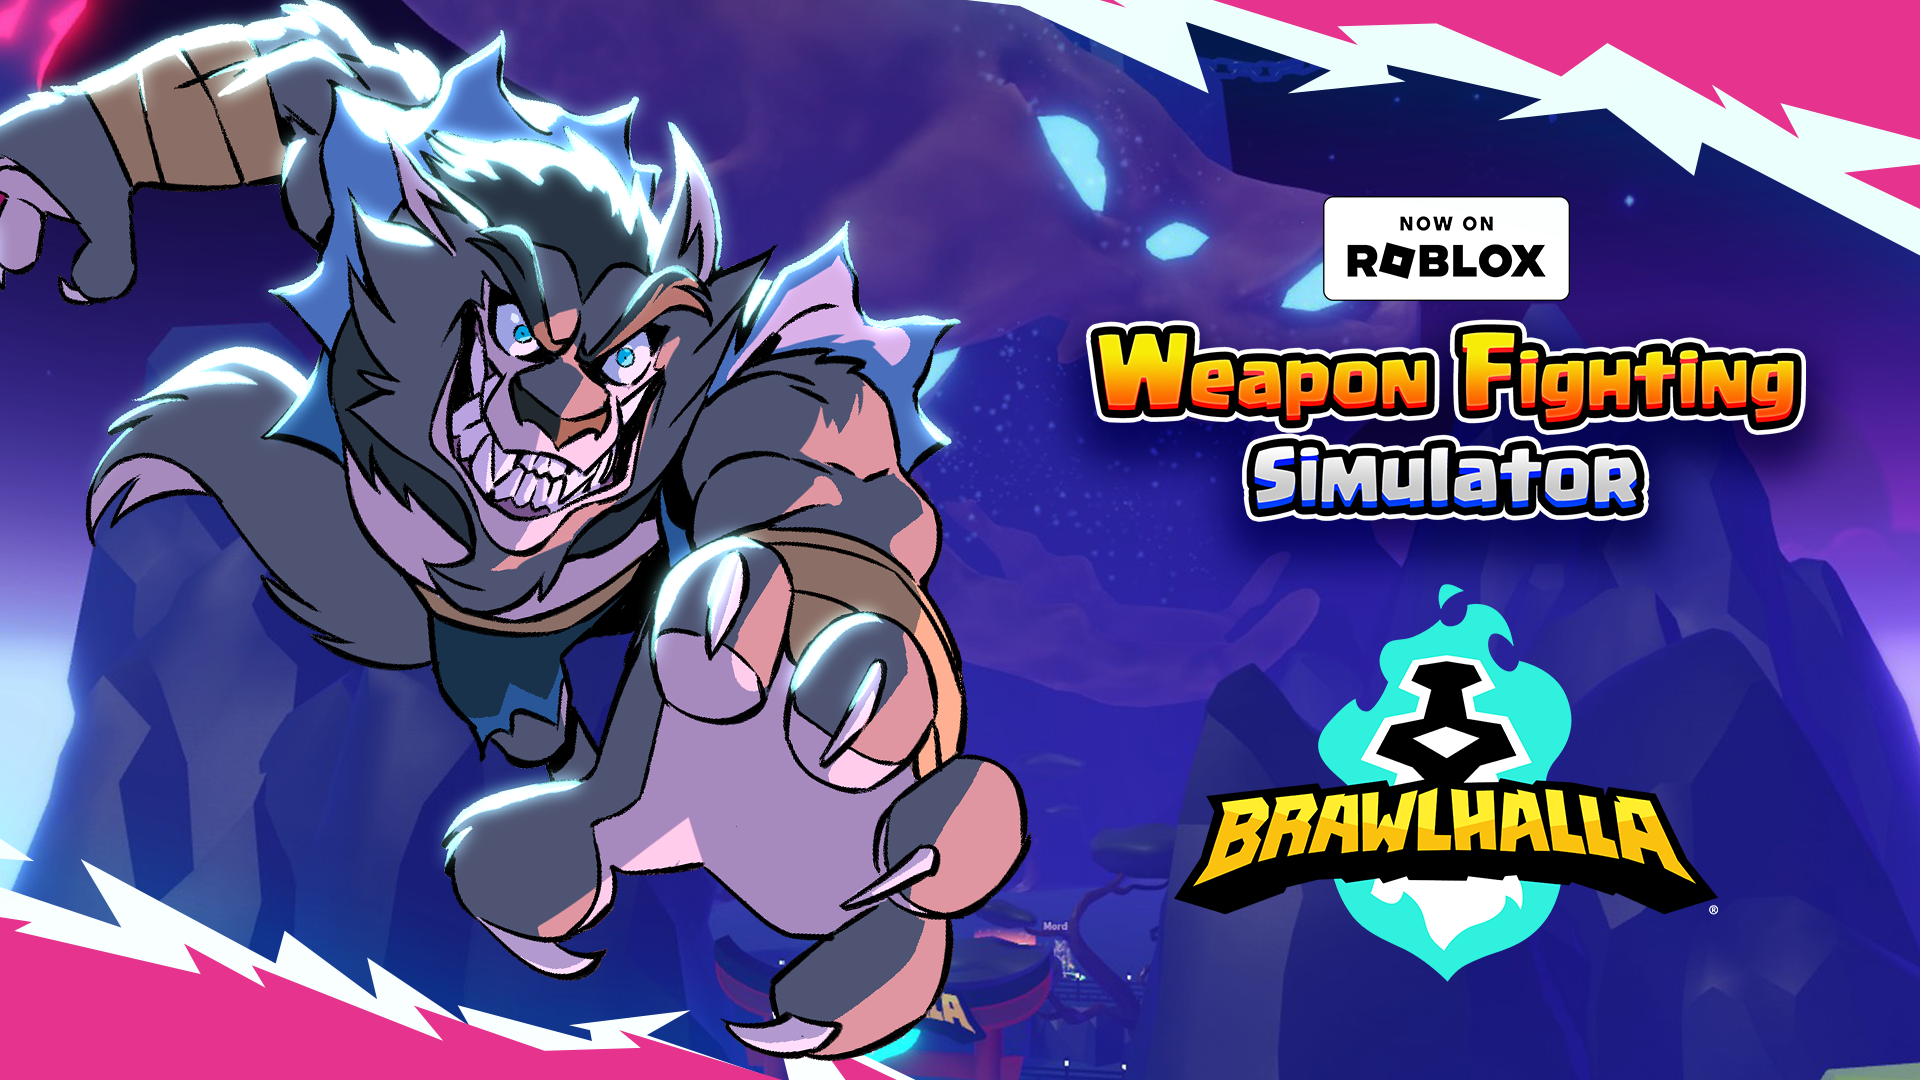 Play Brawlhalla on Roblox in Weapon Fighting Simulator on November 15th!